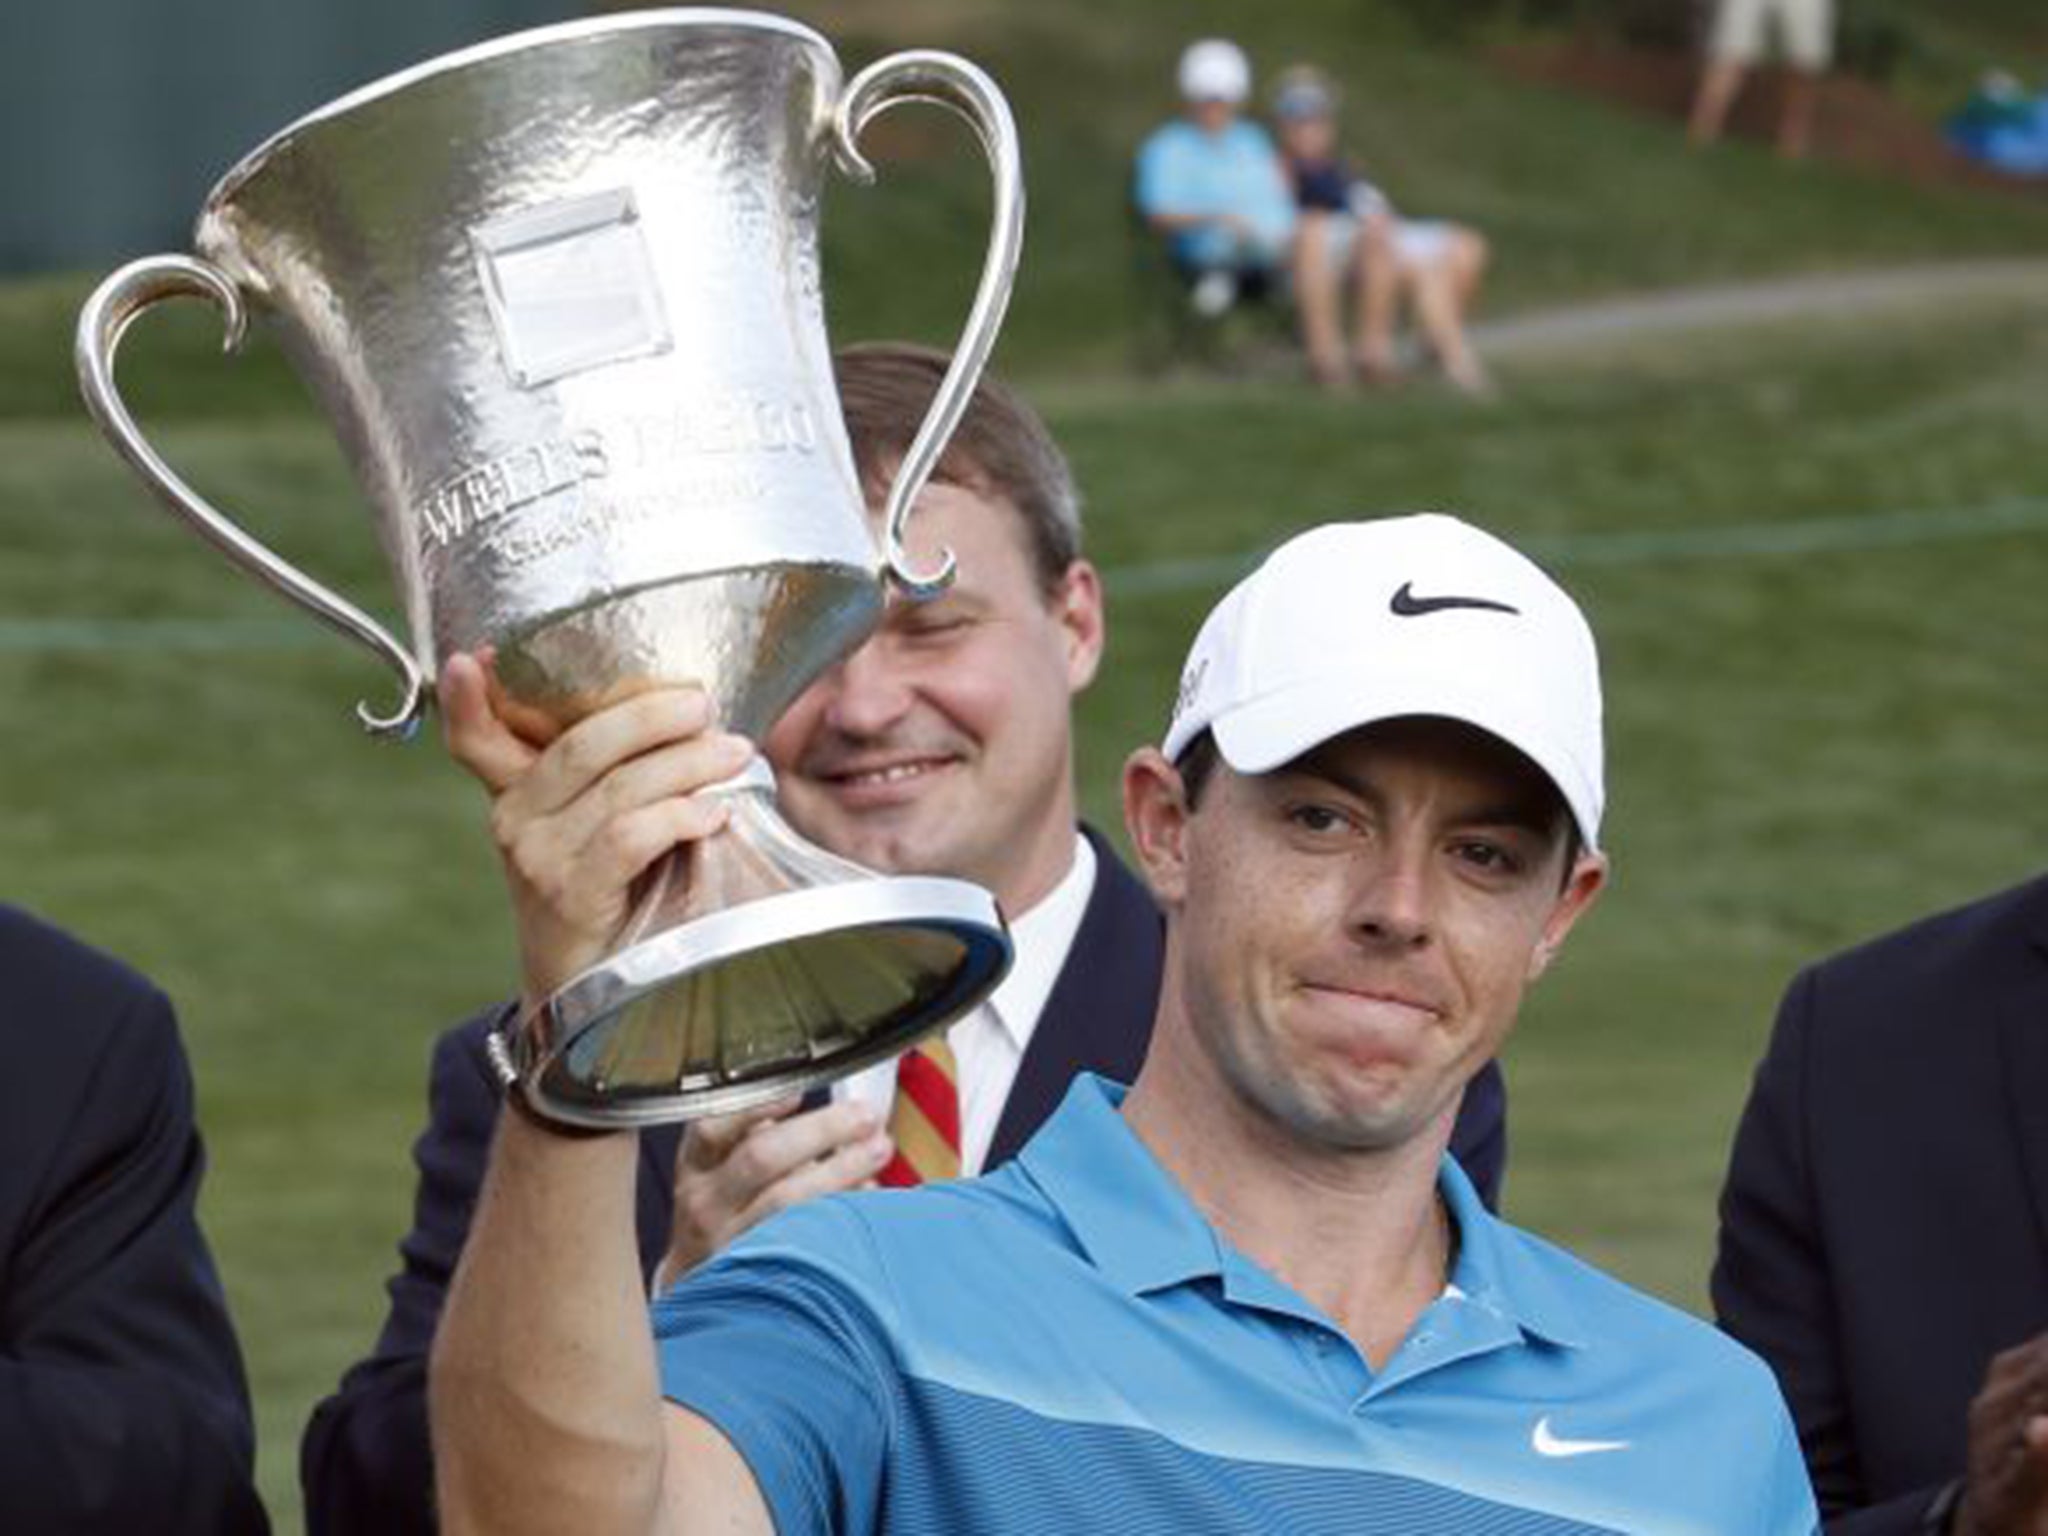 Rory McIlroy shows off the Wells Fargo Trophy, which he won by seven strokes at Quail Hollow on Sunday